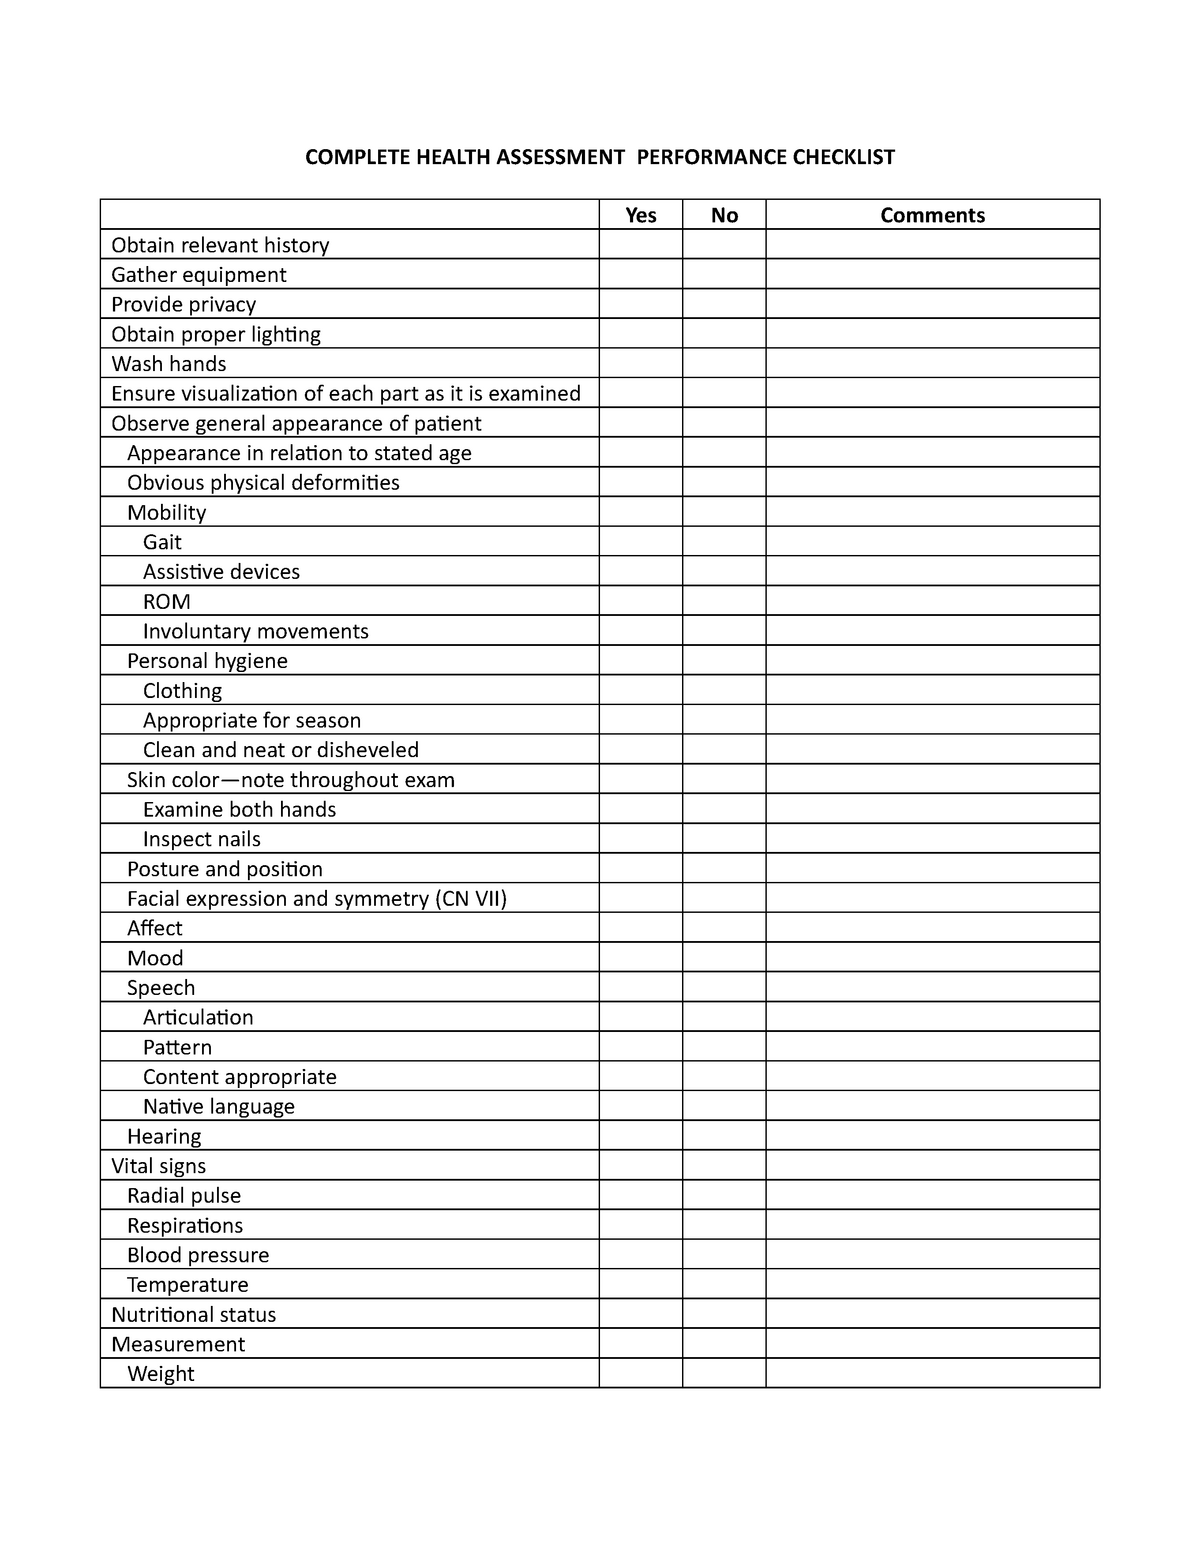 Complete Health Assessment Checklist COMPLETE HEALTH ASSESSMENT